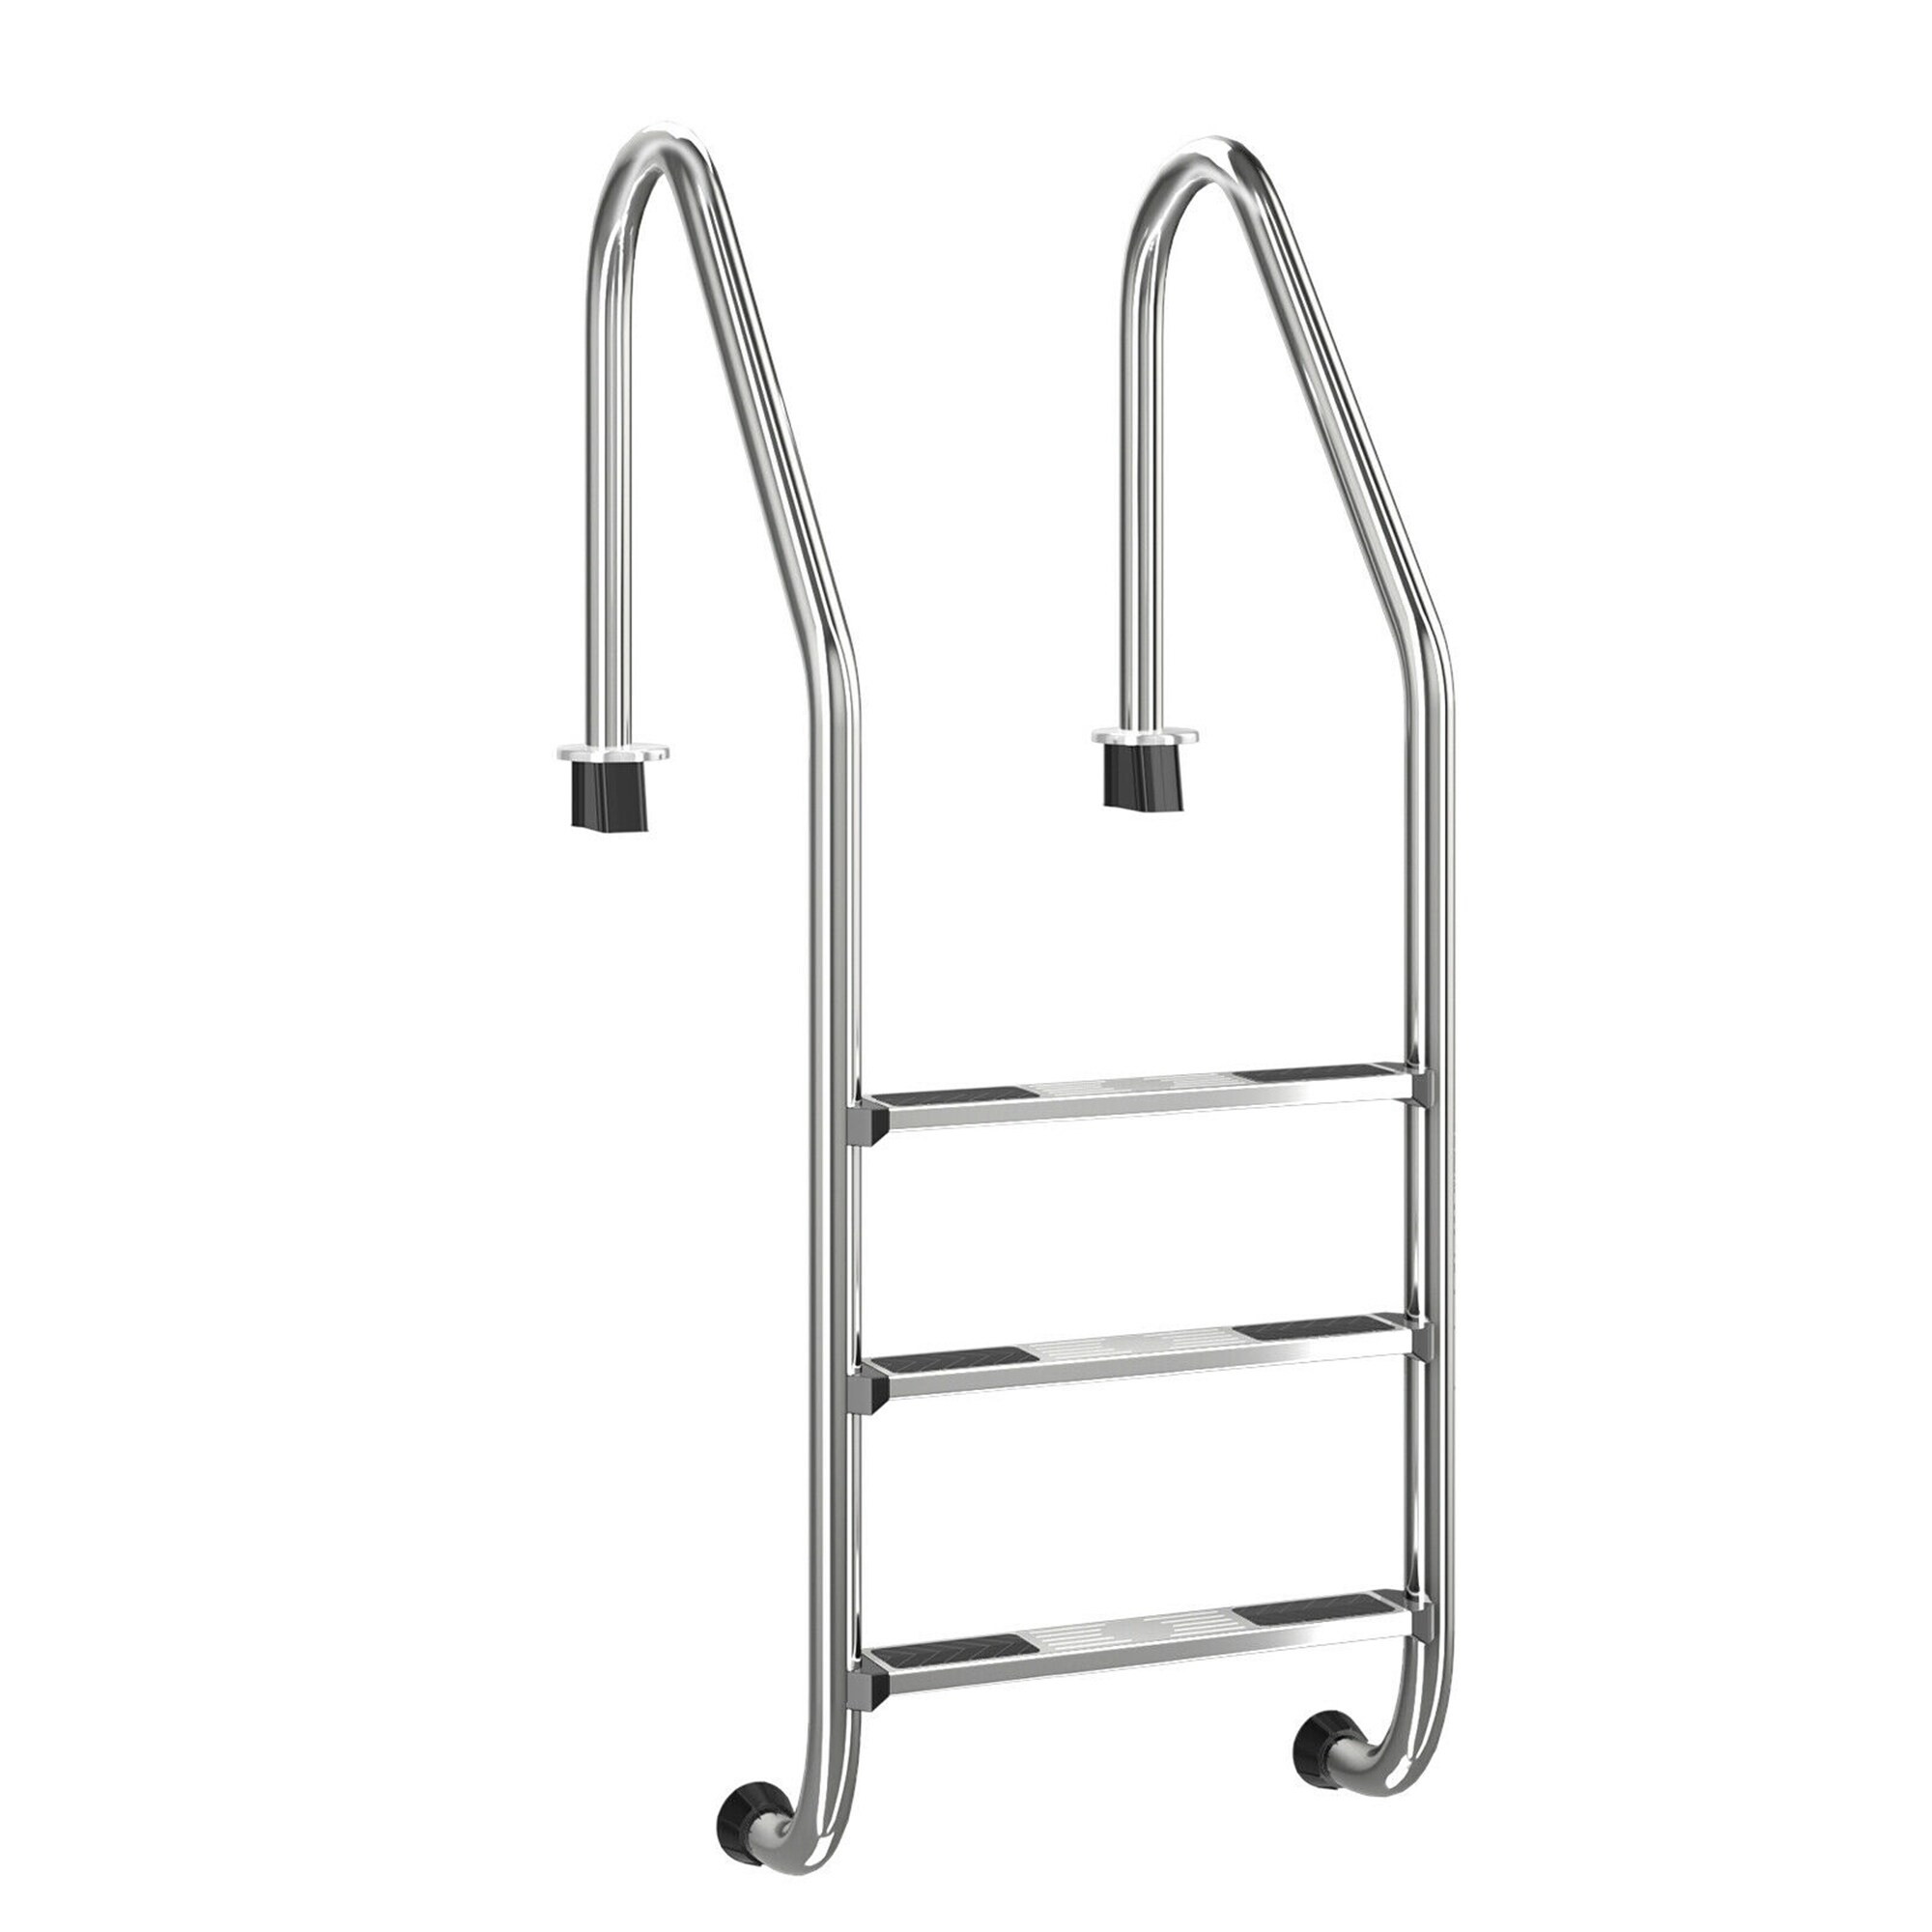 Goplus Swimming Pool Ladder for In Ground Pools Heavy Duty 3-Step Stainless Steel Pool Step Ladder with Easy Mount Legs 